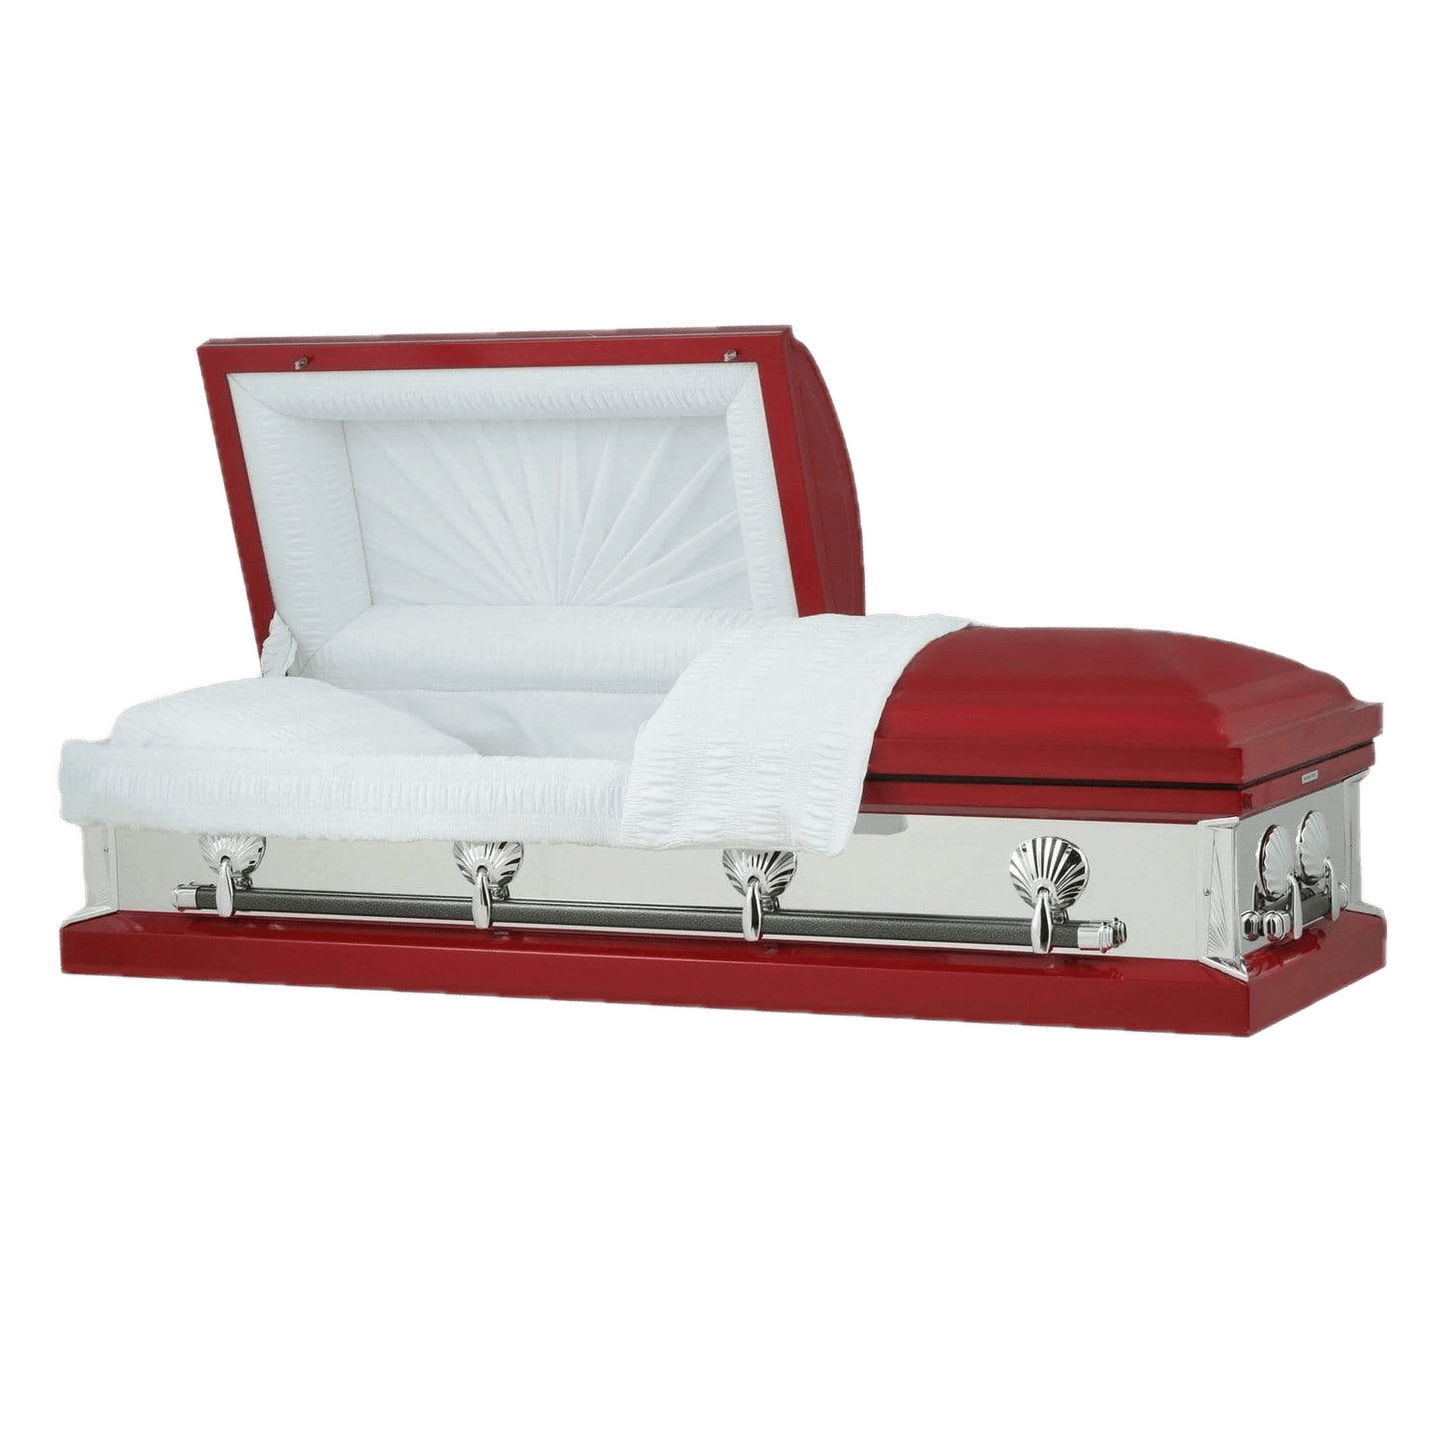 Reflections Series | Red Steel Casket with White Interior